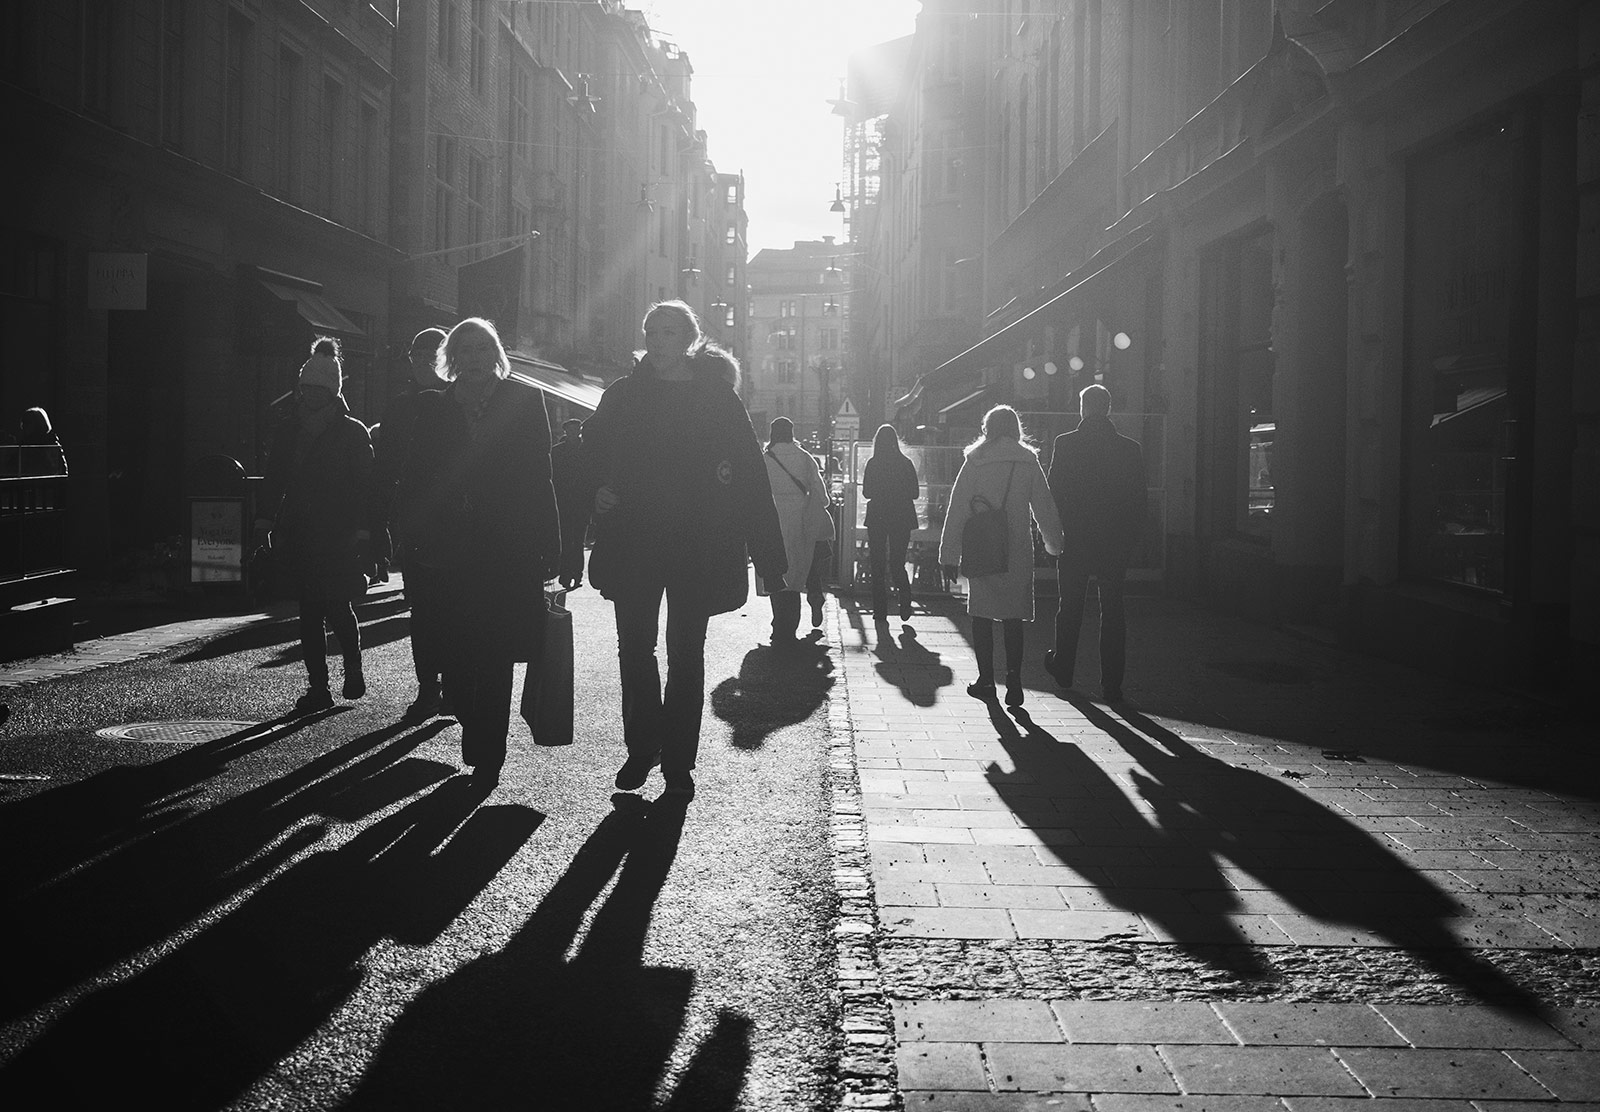 People and shadows in the street